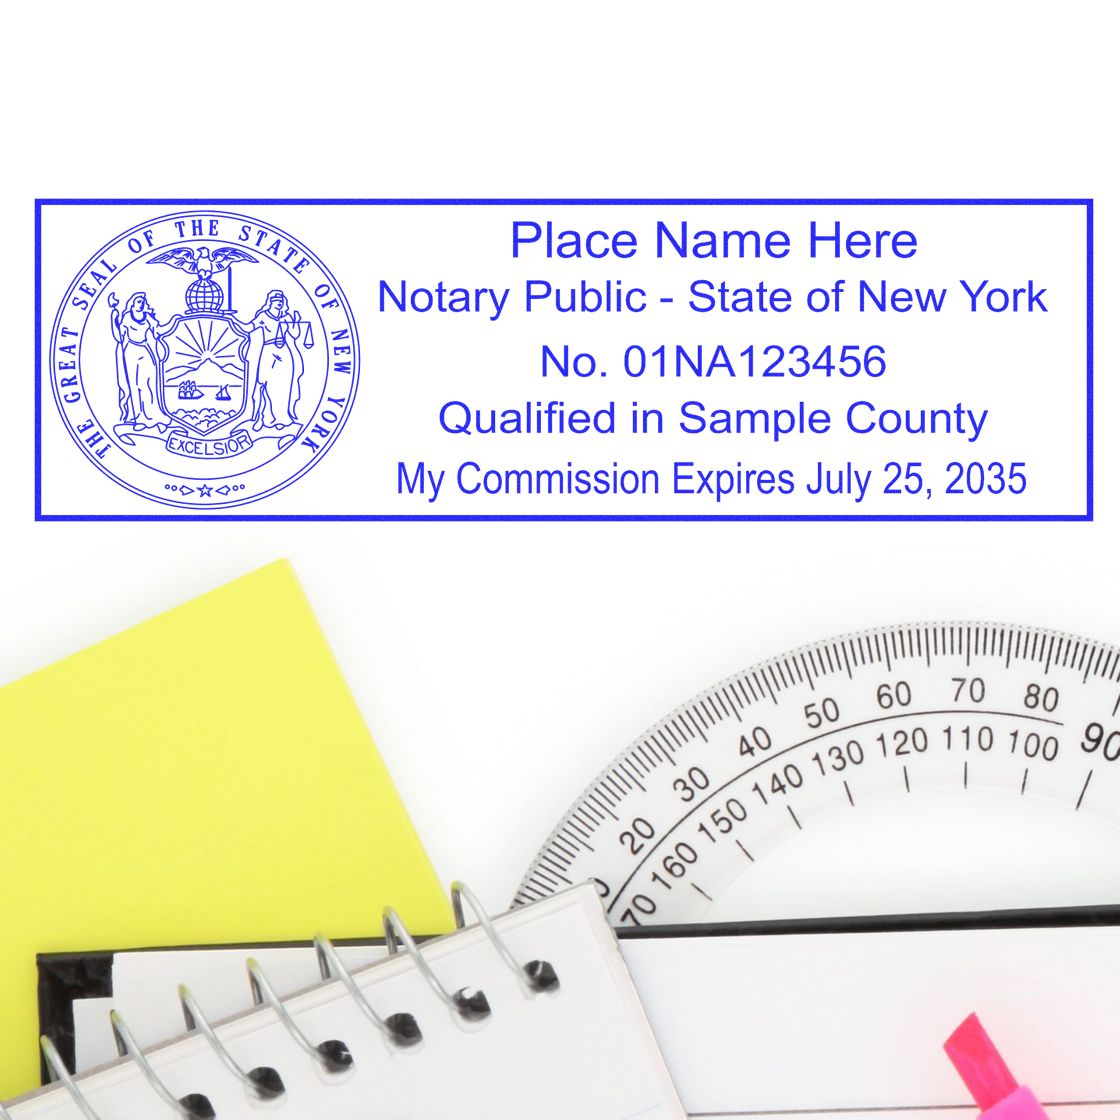 A stamped impression of the Super Slim New York Notary Public Stamp in this stylish lifestyle photo, setting the tone for a unique and personalized product.